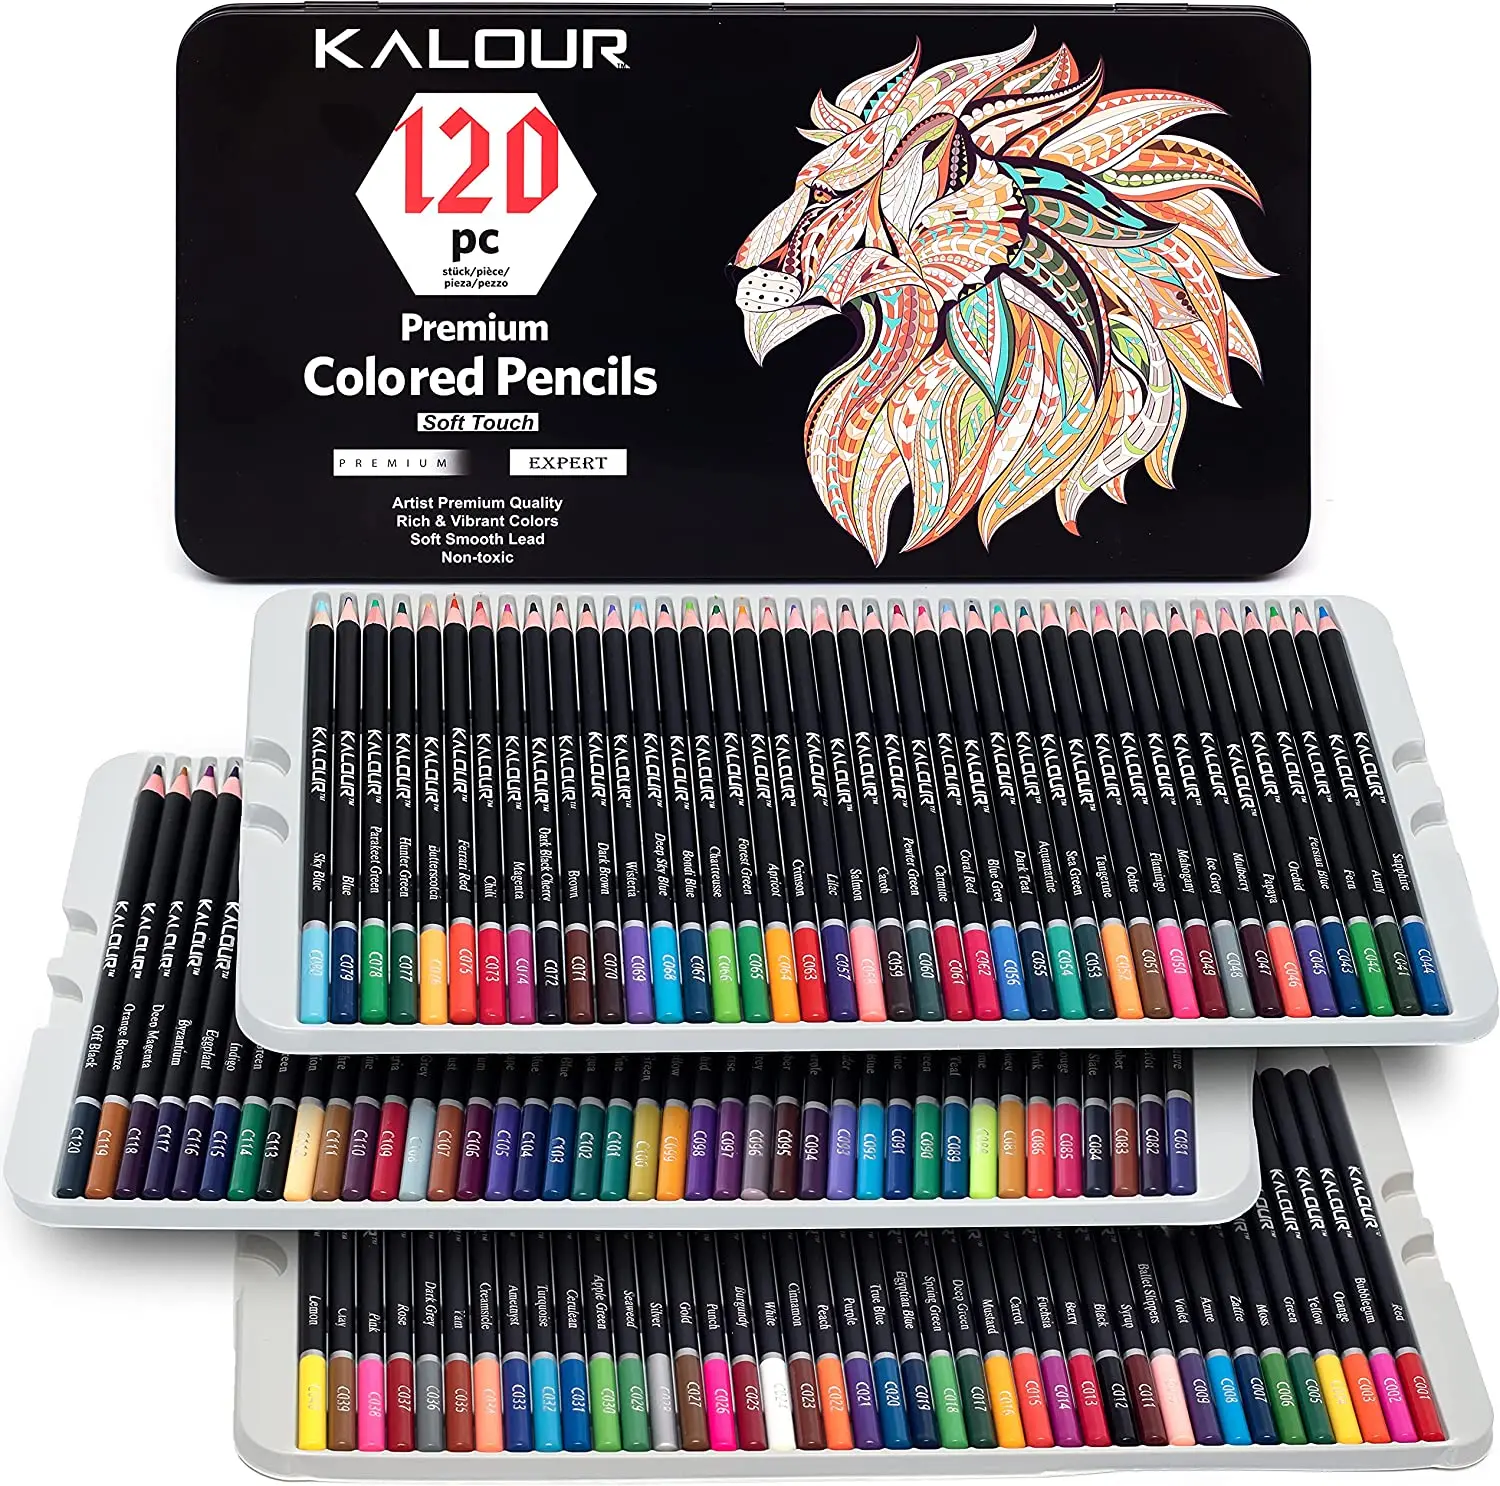 Gold Edition 120 Colored Pencils for Adult Coloring Books, Premier